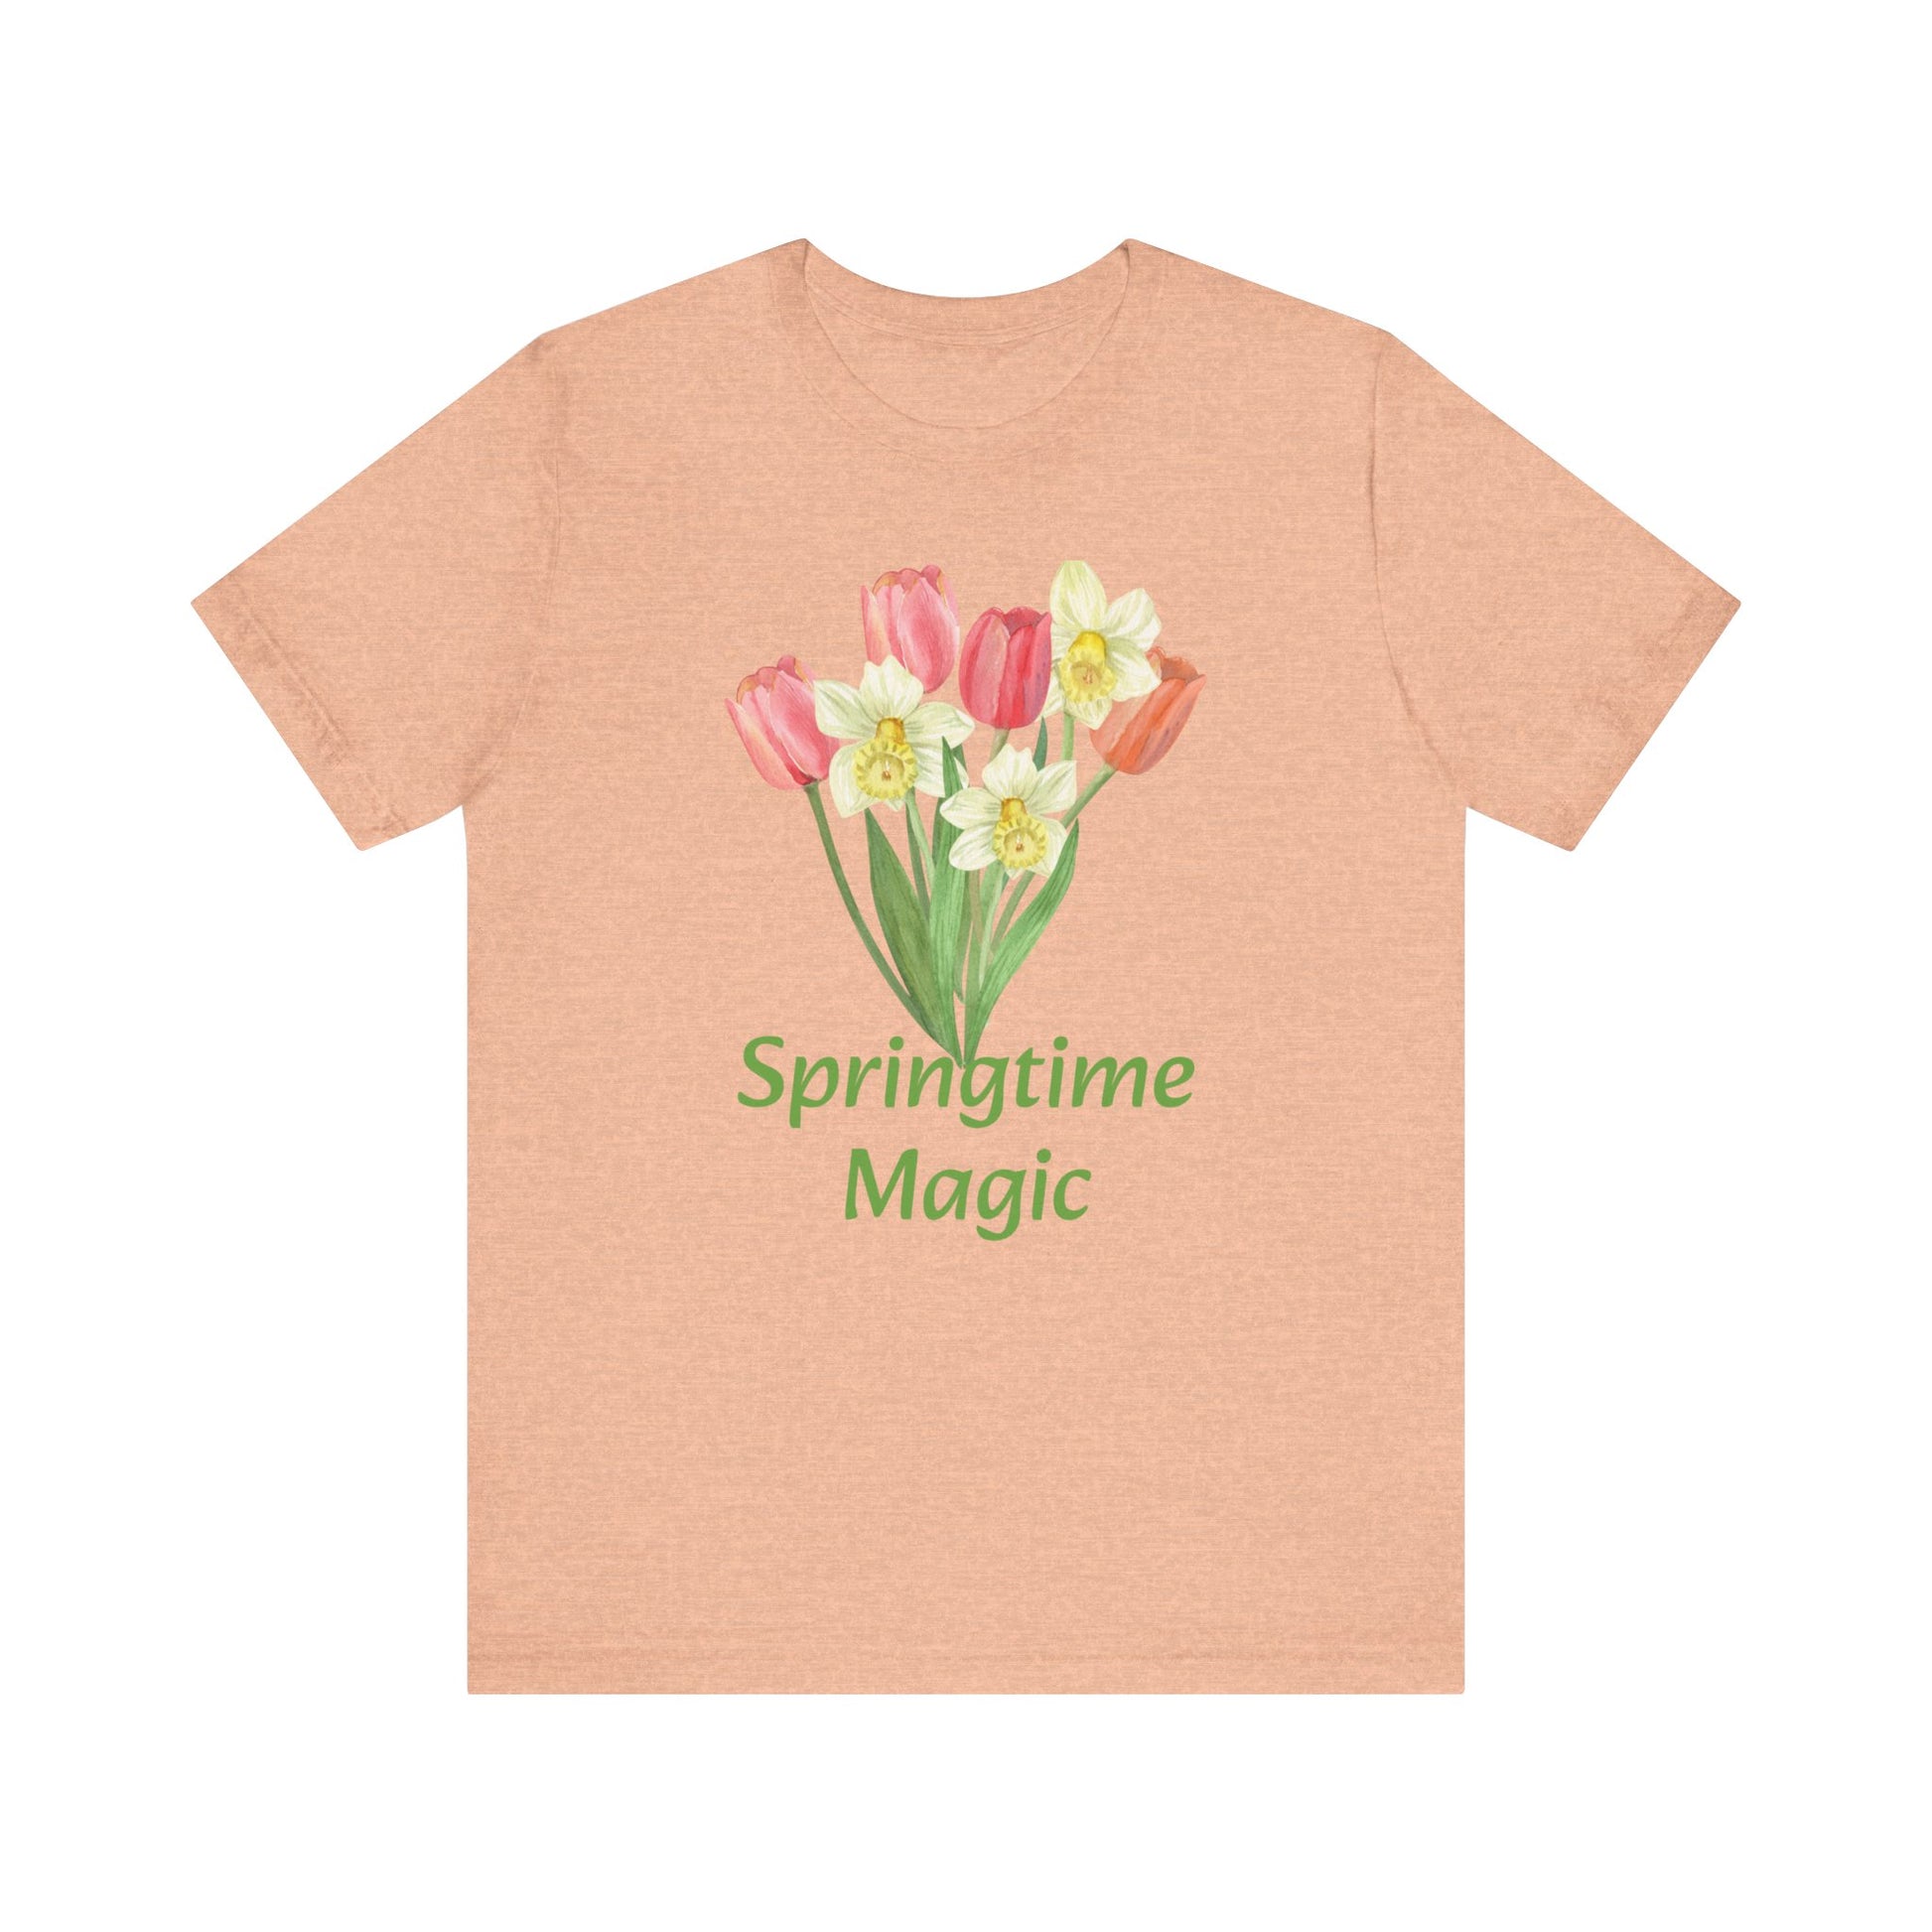 A peach-colored cotton T-shirt with a floral design and the text "springtime magic" from Printify's Unisex Springtime-Magic T-shirt by Bella + Canvas.